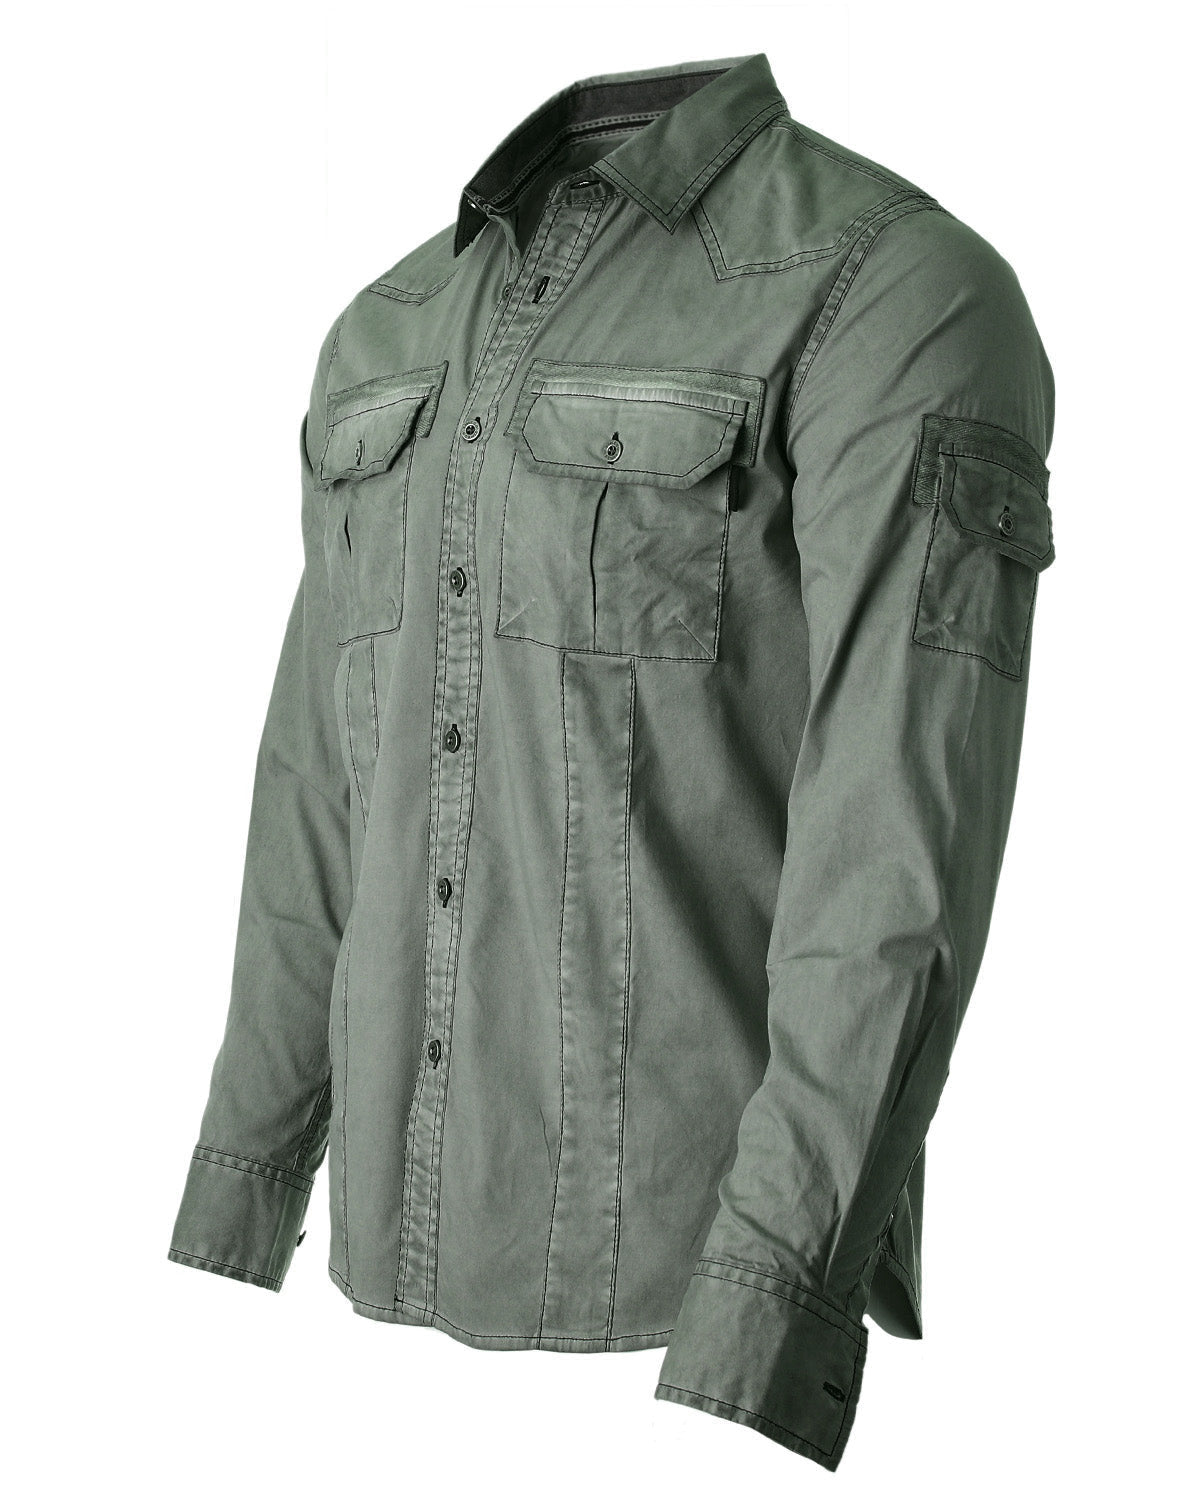 Men's Stretch Flex Slim Color Washed Vintage Rugged Button Shirt Army Green